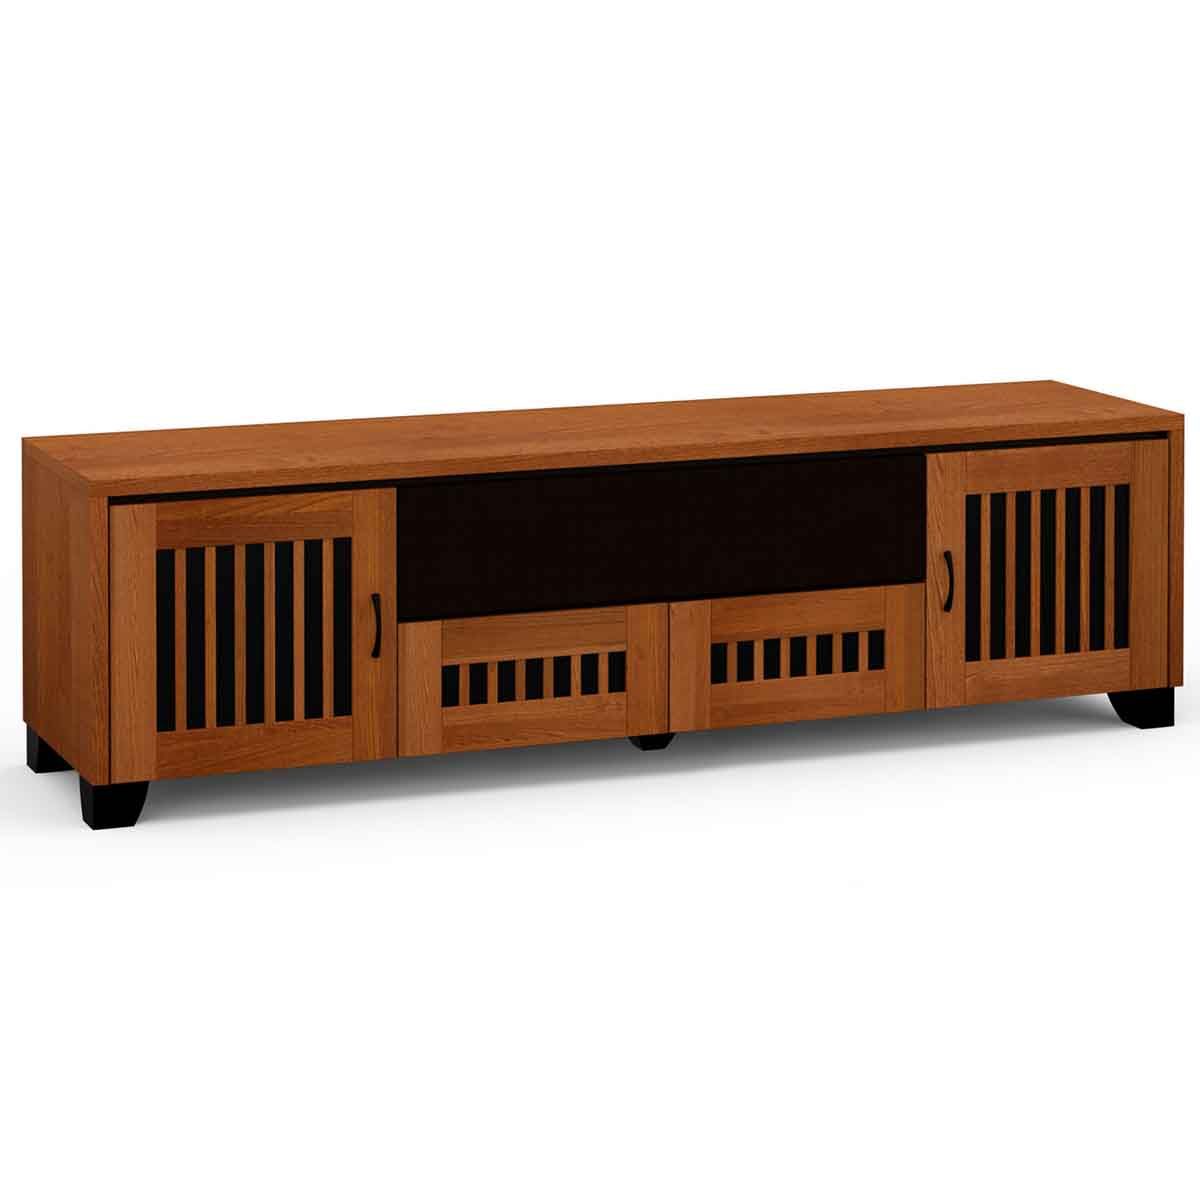 Salamander Designs Sonoma 245 Quad-Width AV Cabinet with Center Speaker Opening- American Cherry- front view